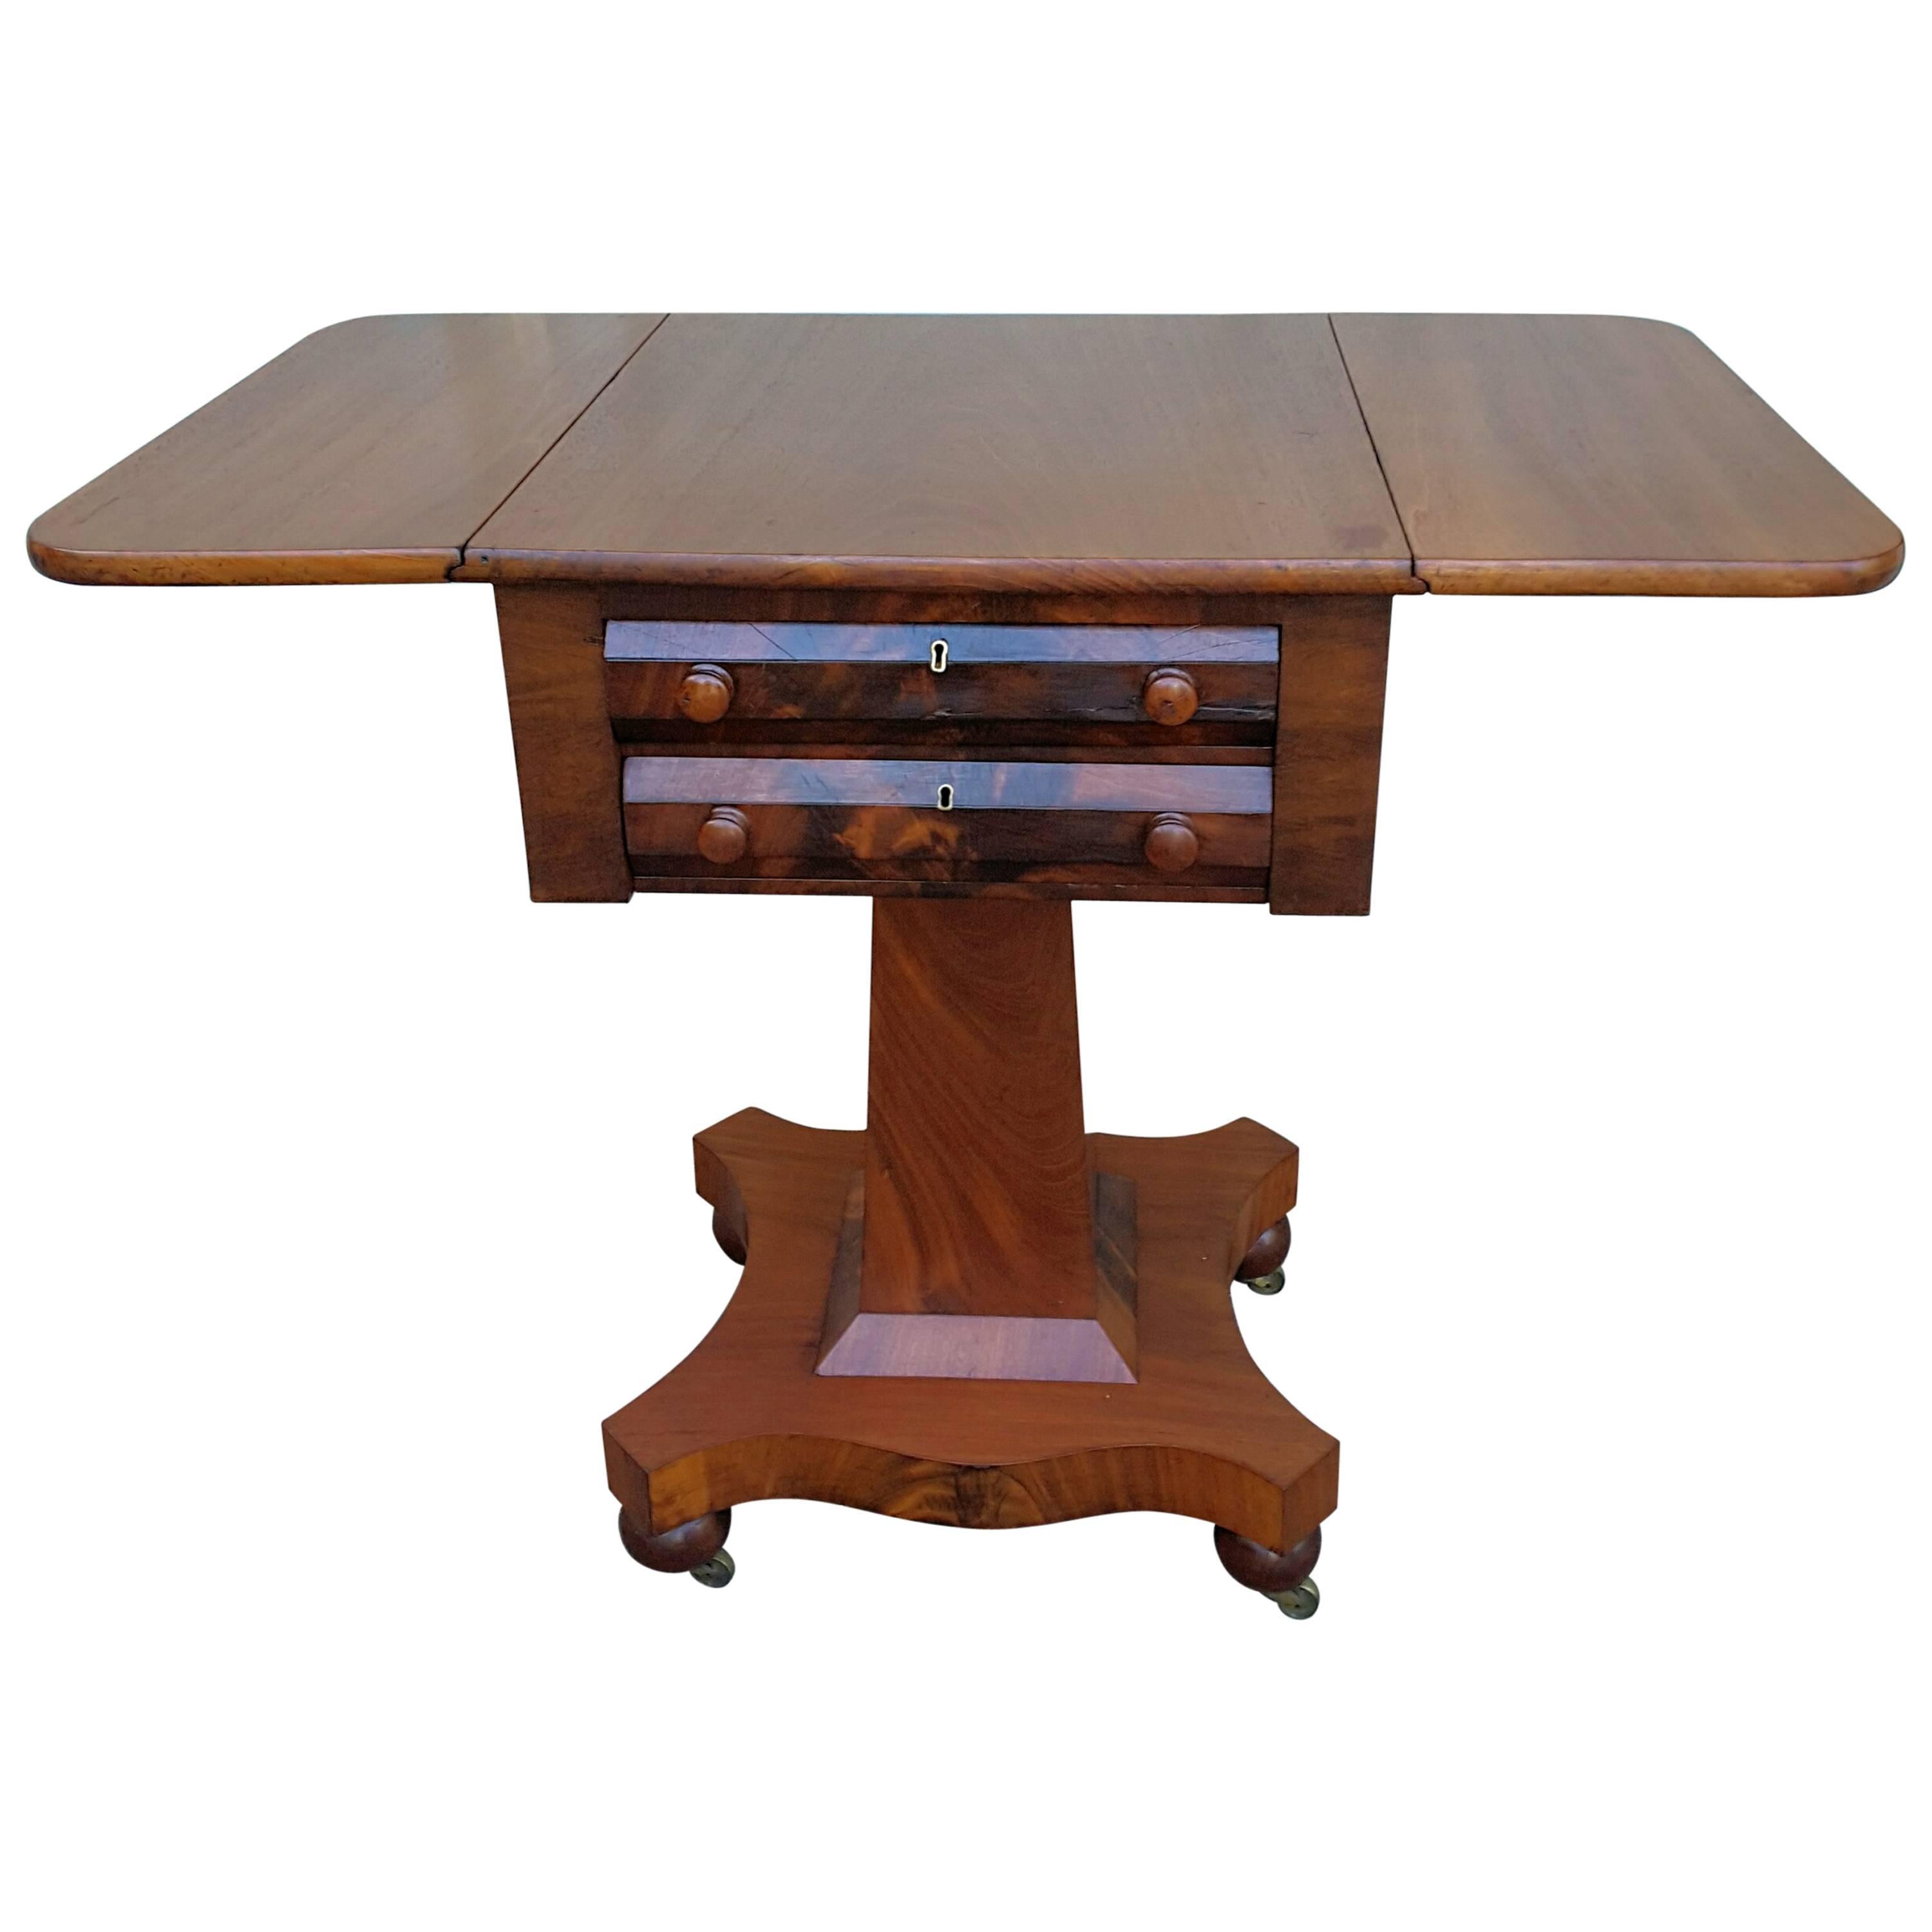 Neoclassical American Empire Drop-Leaf Side Table in Mahogany, circa 1830-1840